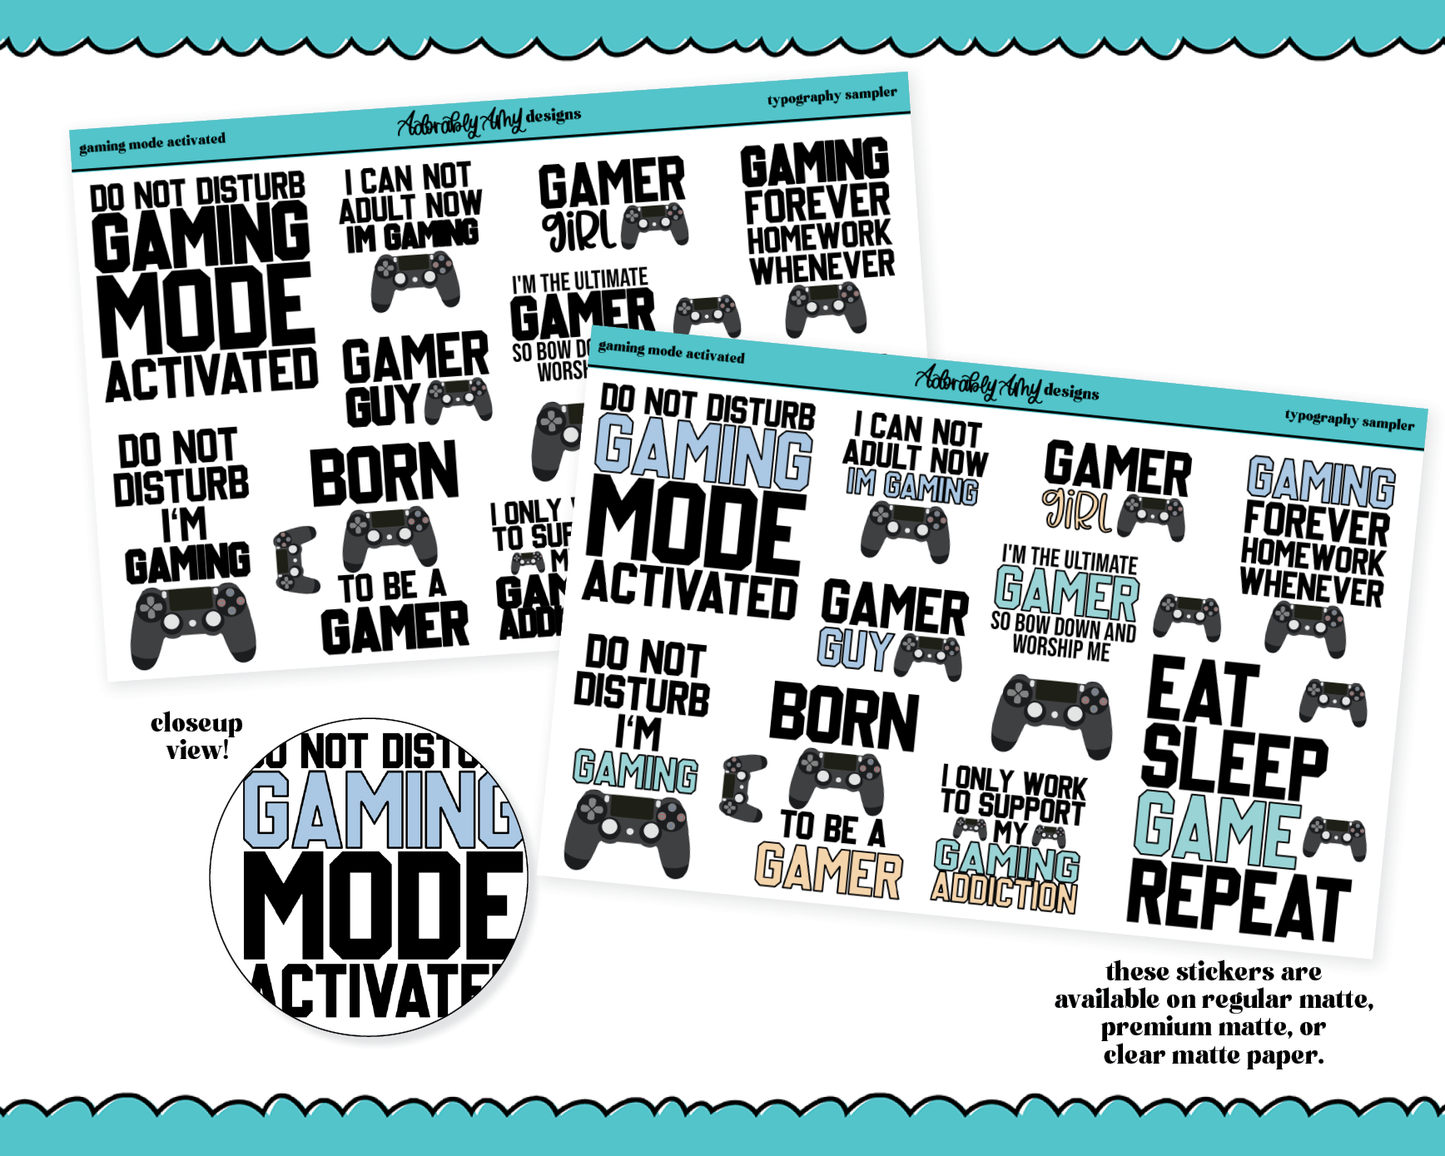 Gaming Mode Activated Typography Sampler Planner Stickers for any Planner or Insert